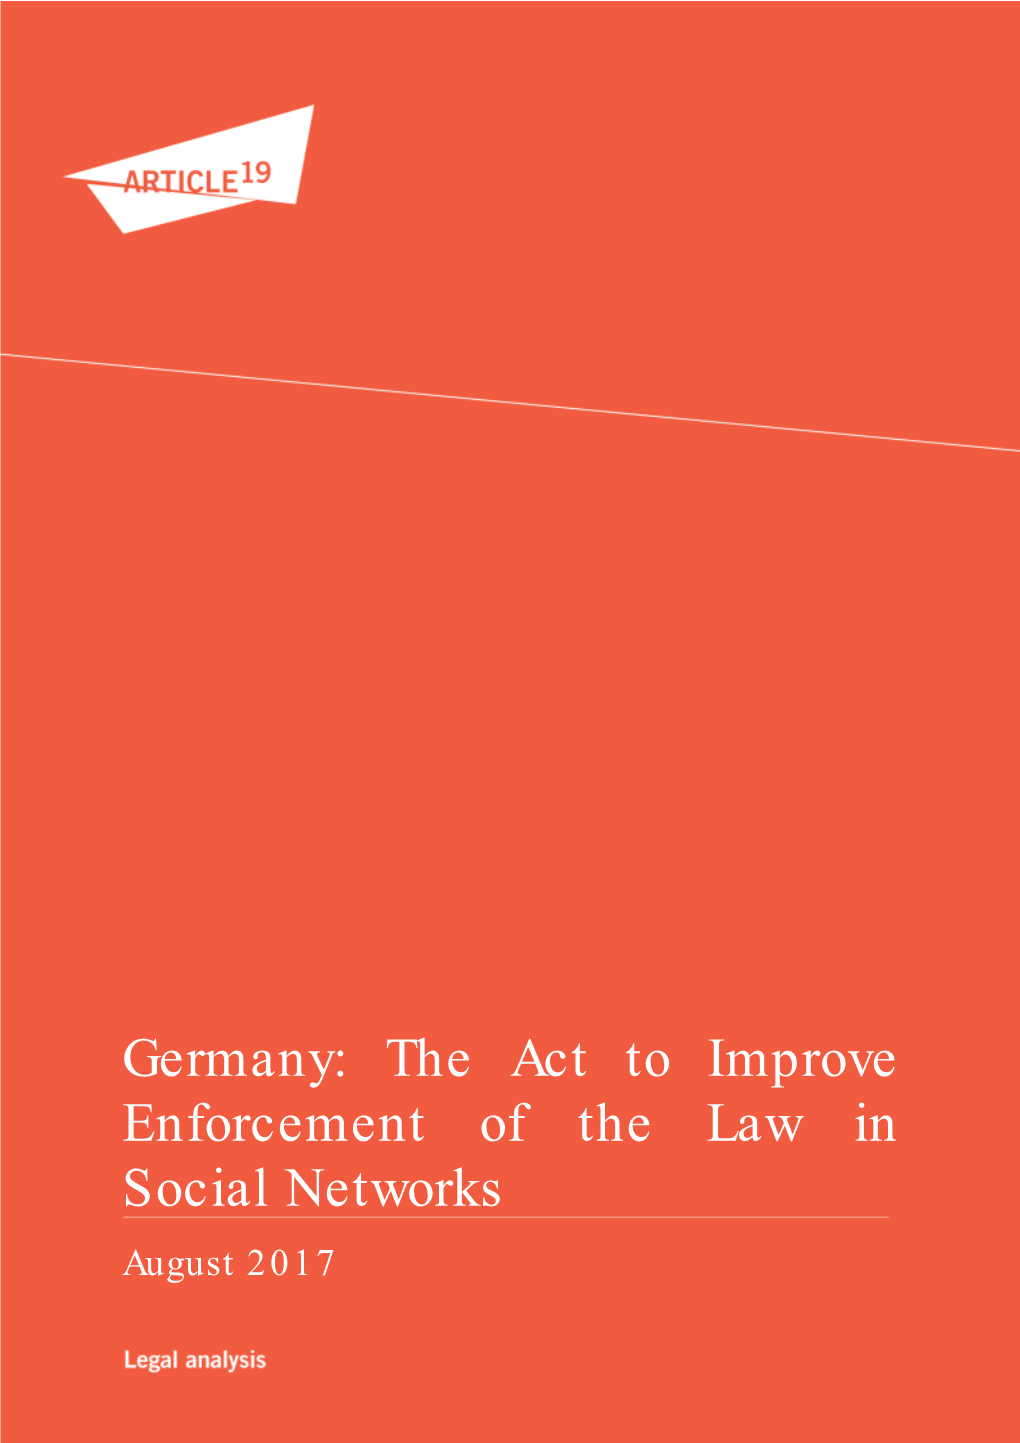 Germany: the Act to Improve Enforcement of the Law in Social Networks